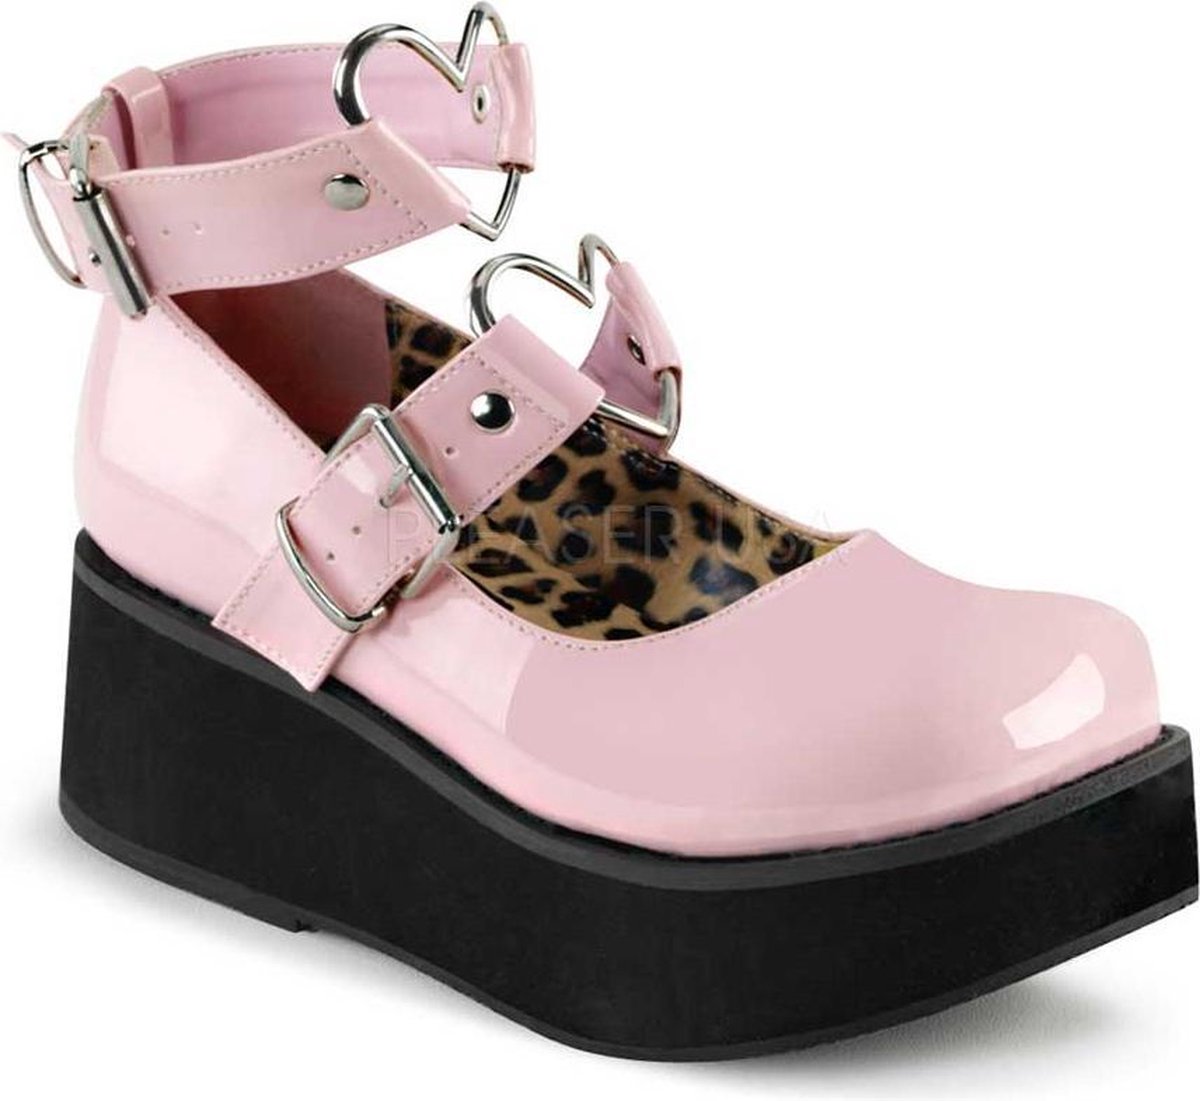 Demonia Sprite 02 shoe with ankle straps buckles and metal heart rings patent pink = )